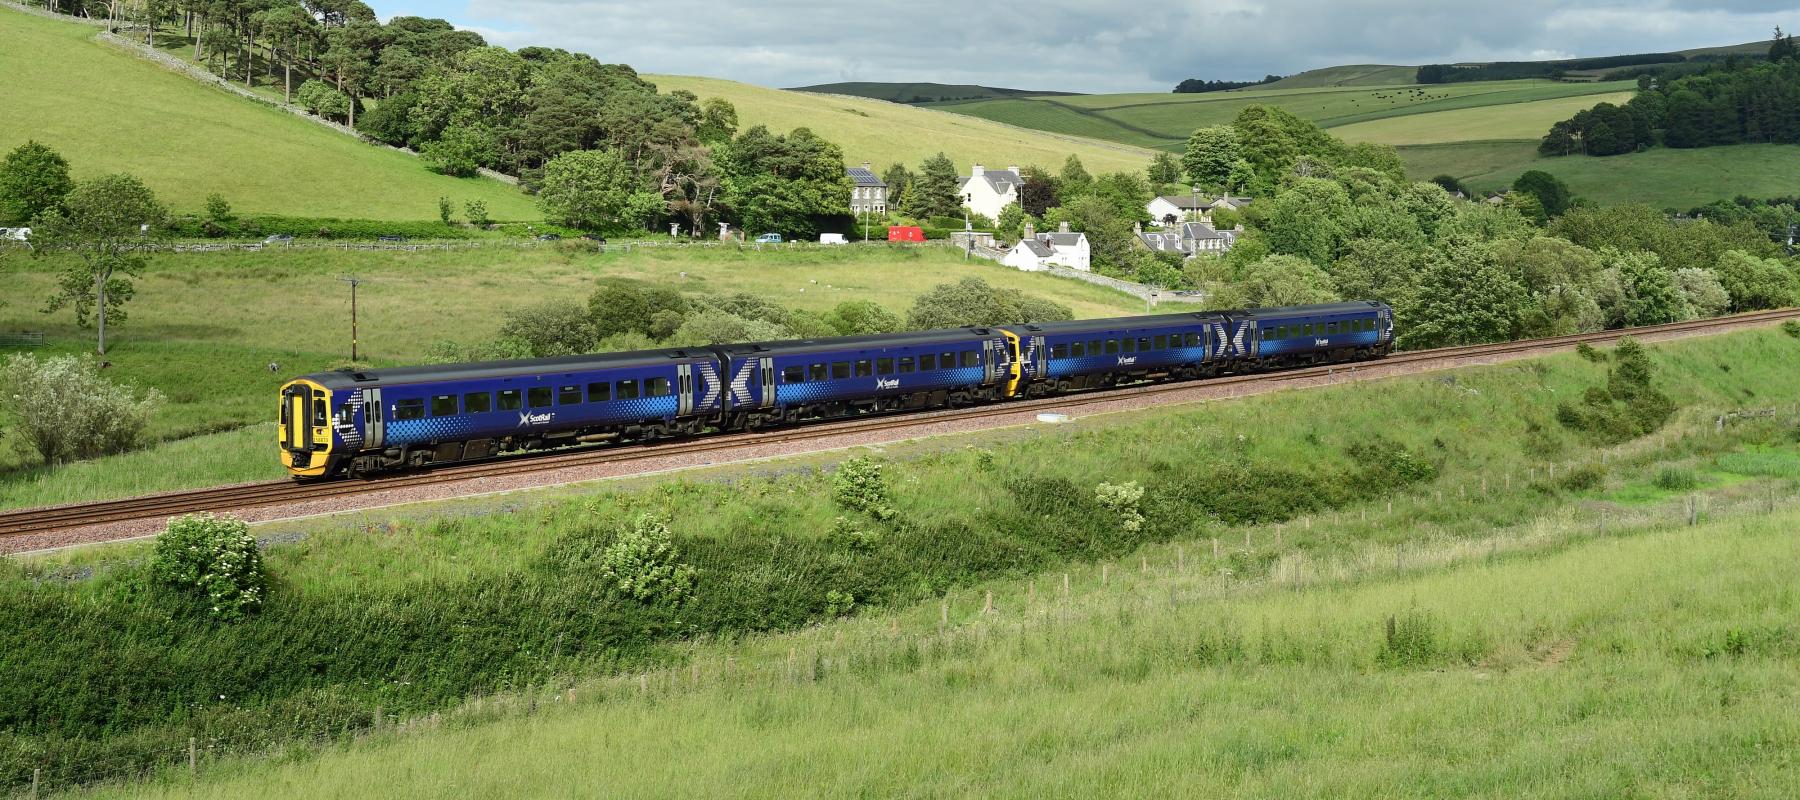 ScotRail Train travelling along the Borders Railway